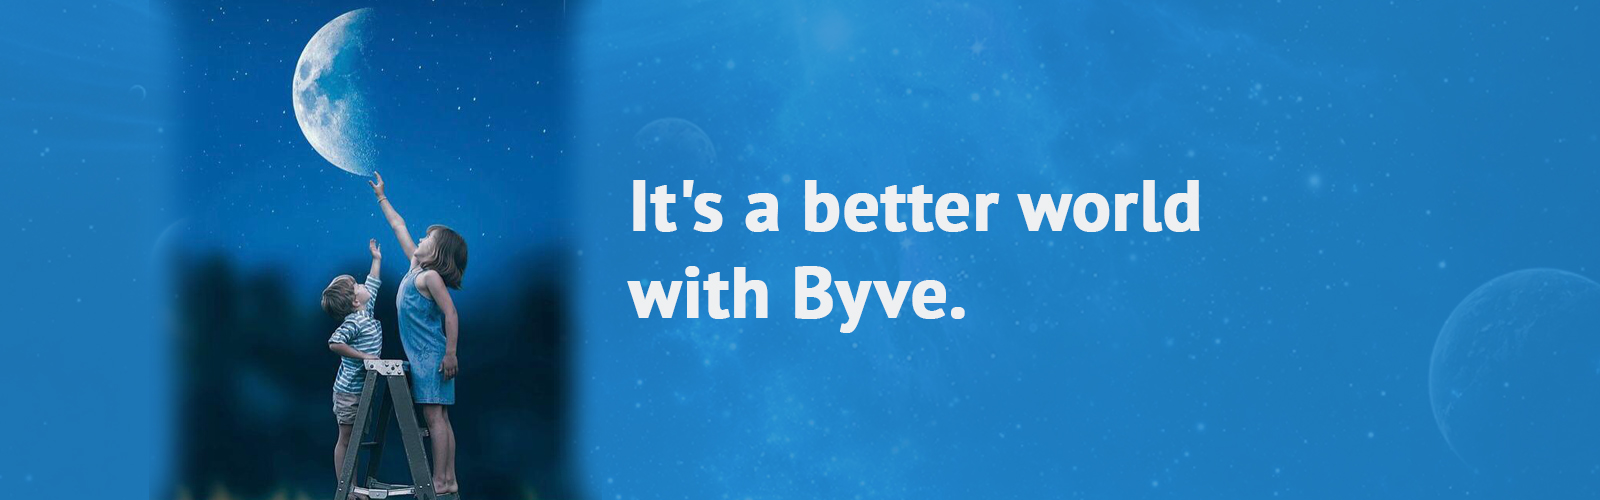 It's a better world with Byve.